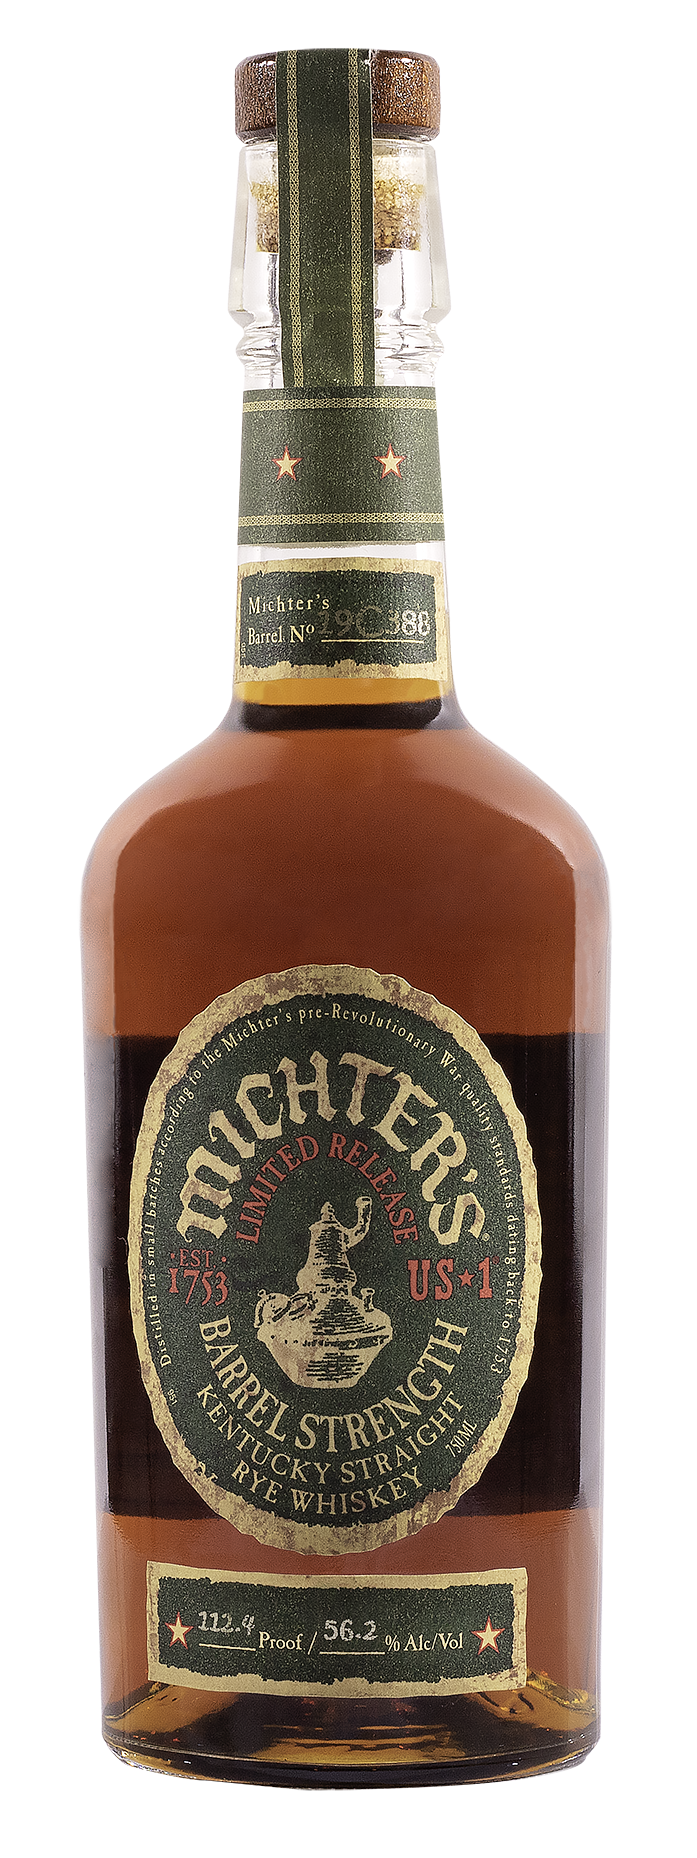 Michter's Limited Release US*1 Barrel Strength Kentucky Straight Rye Whiskey